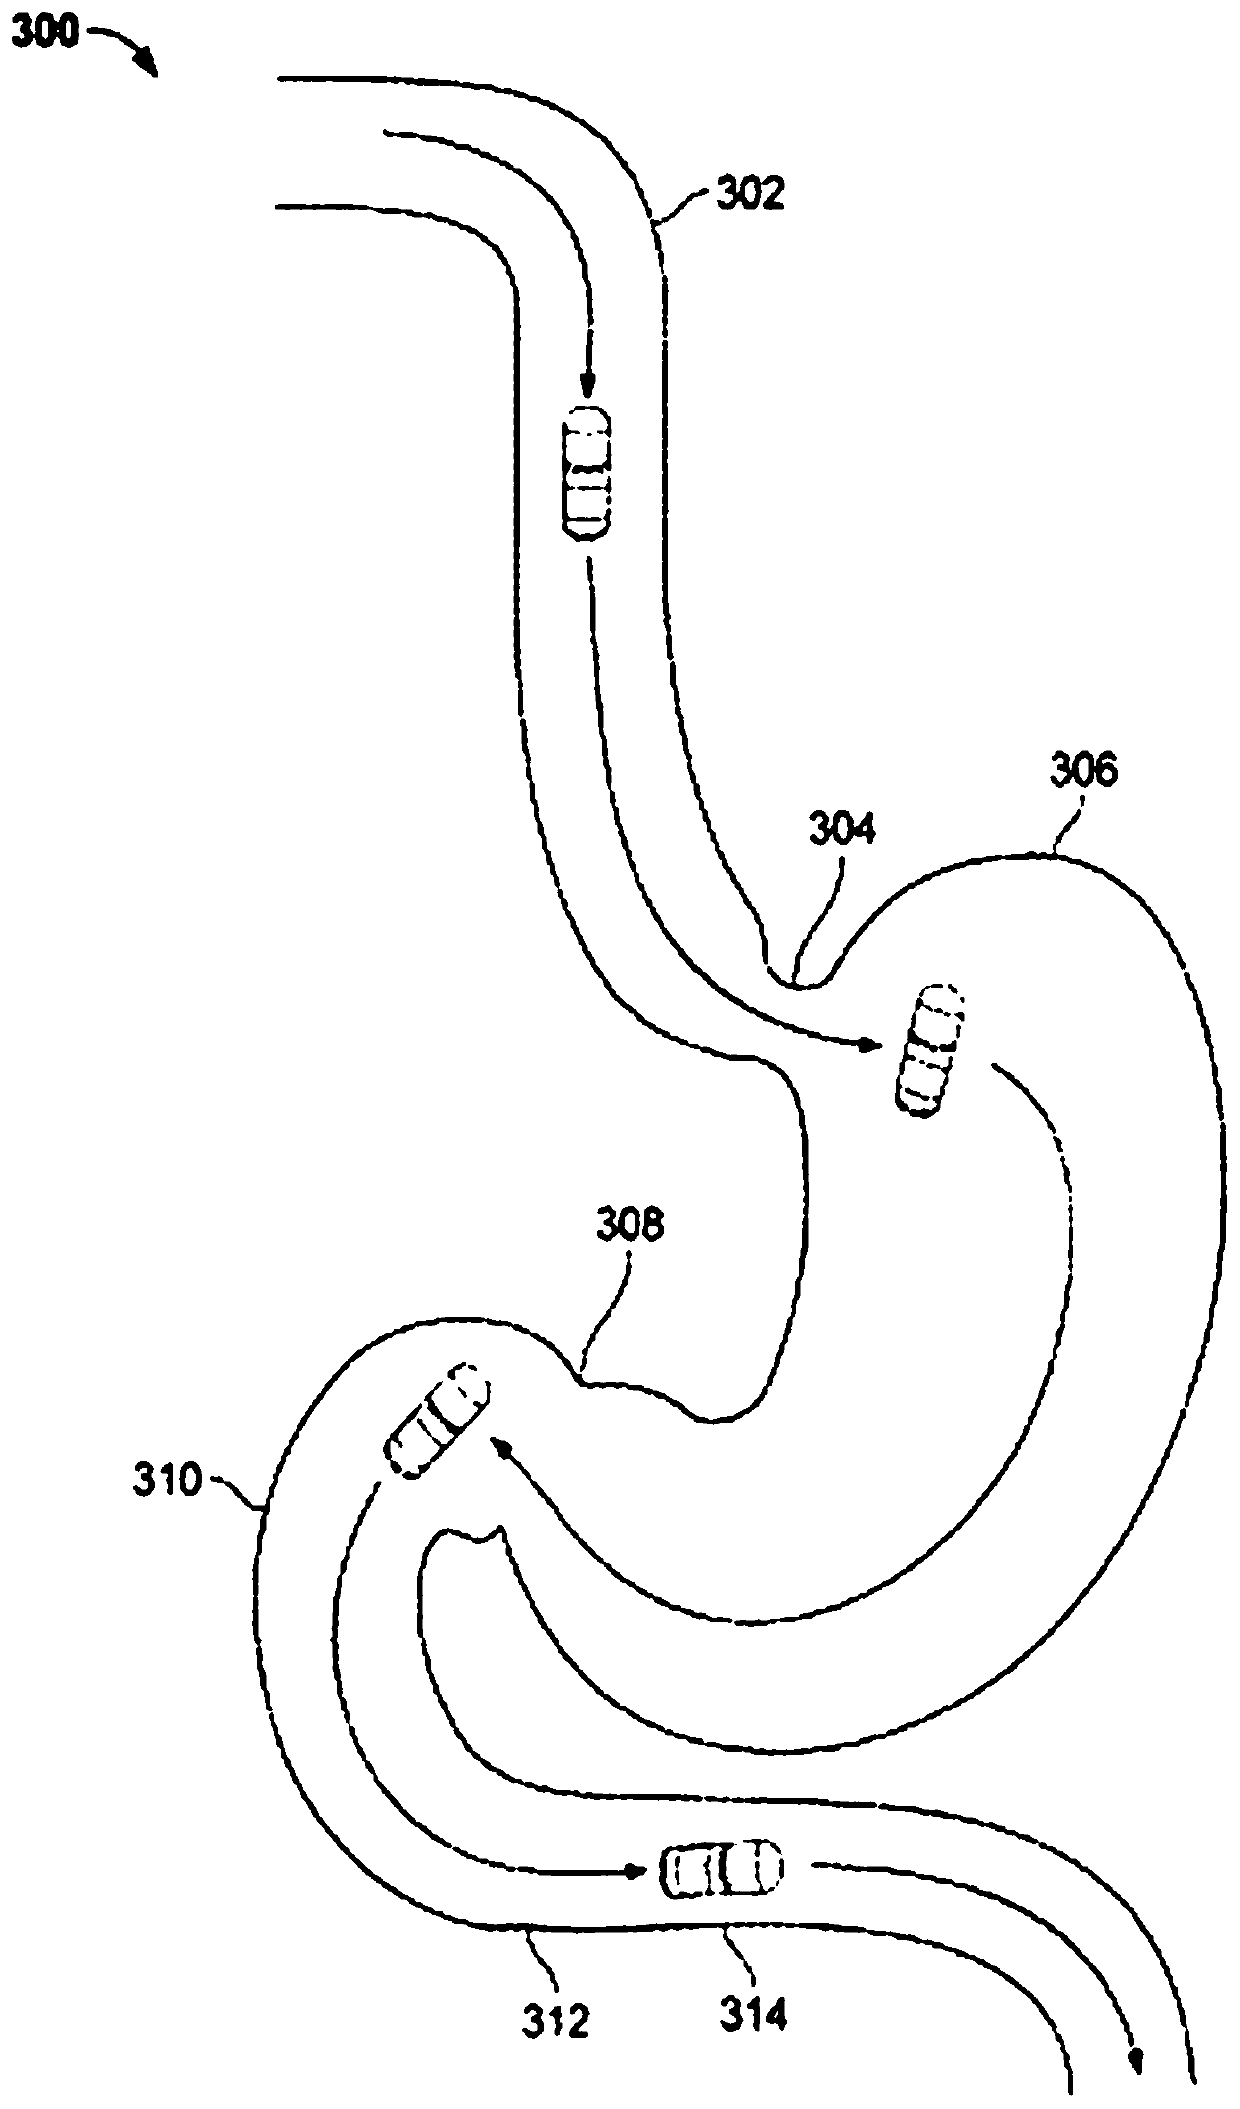 Treatment of a disease of the gastrointestinal tract with a TNF inhibitor